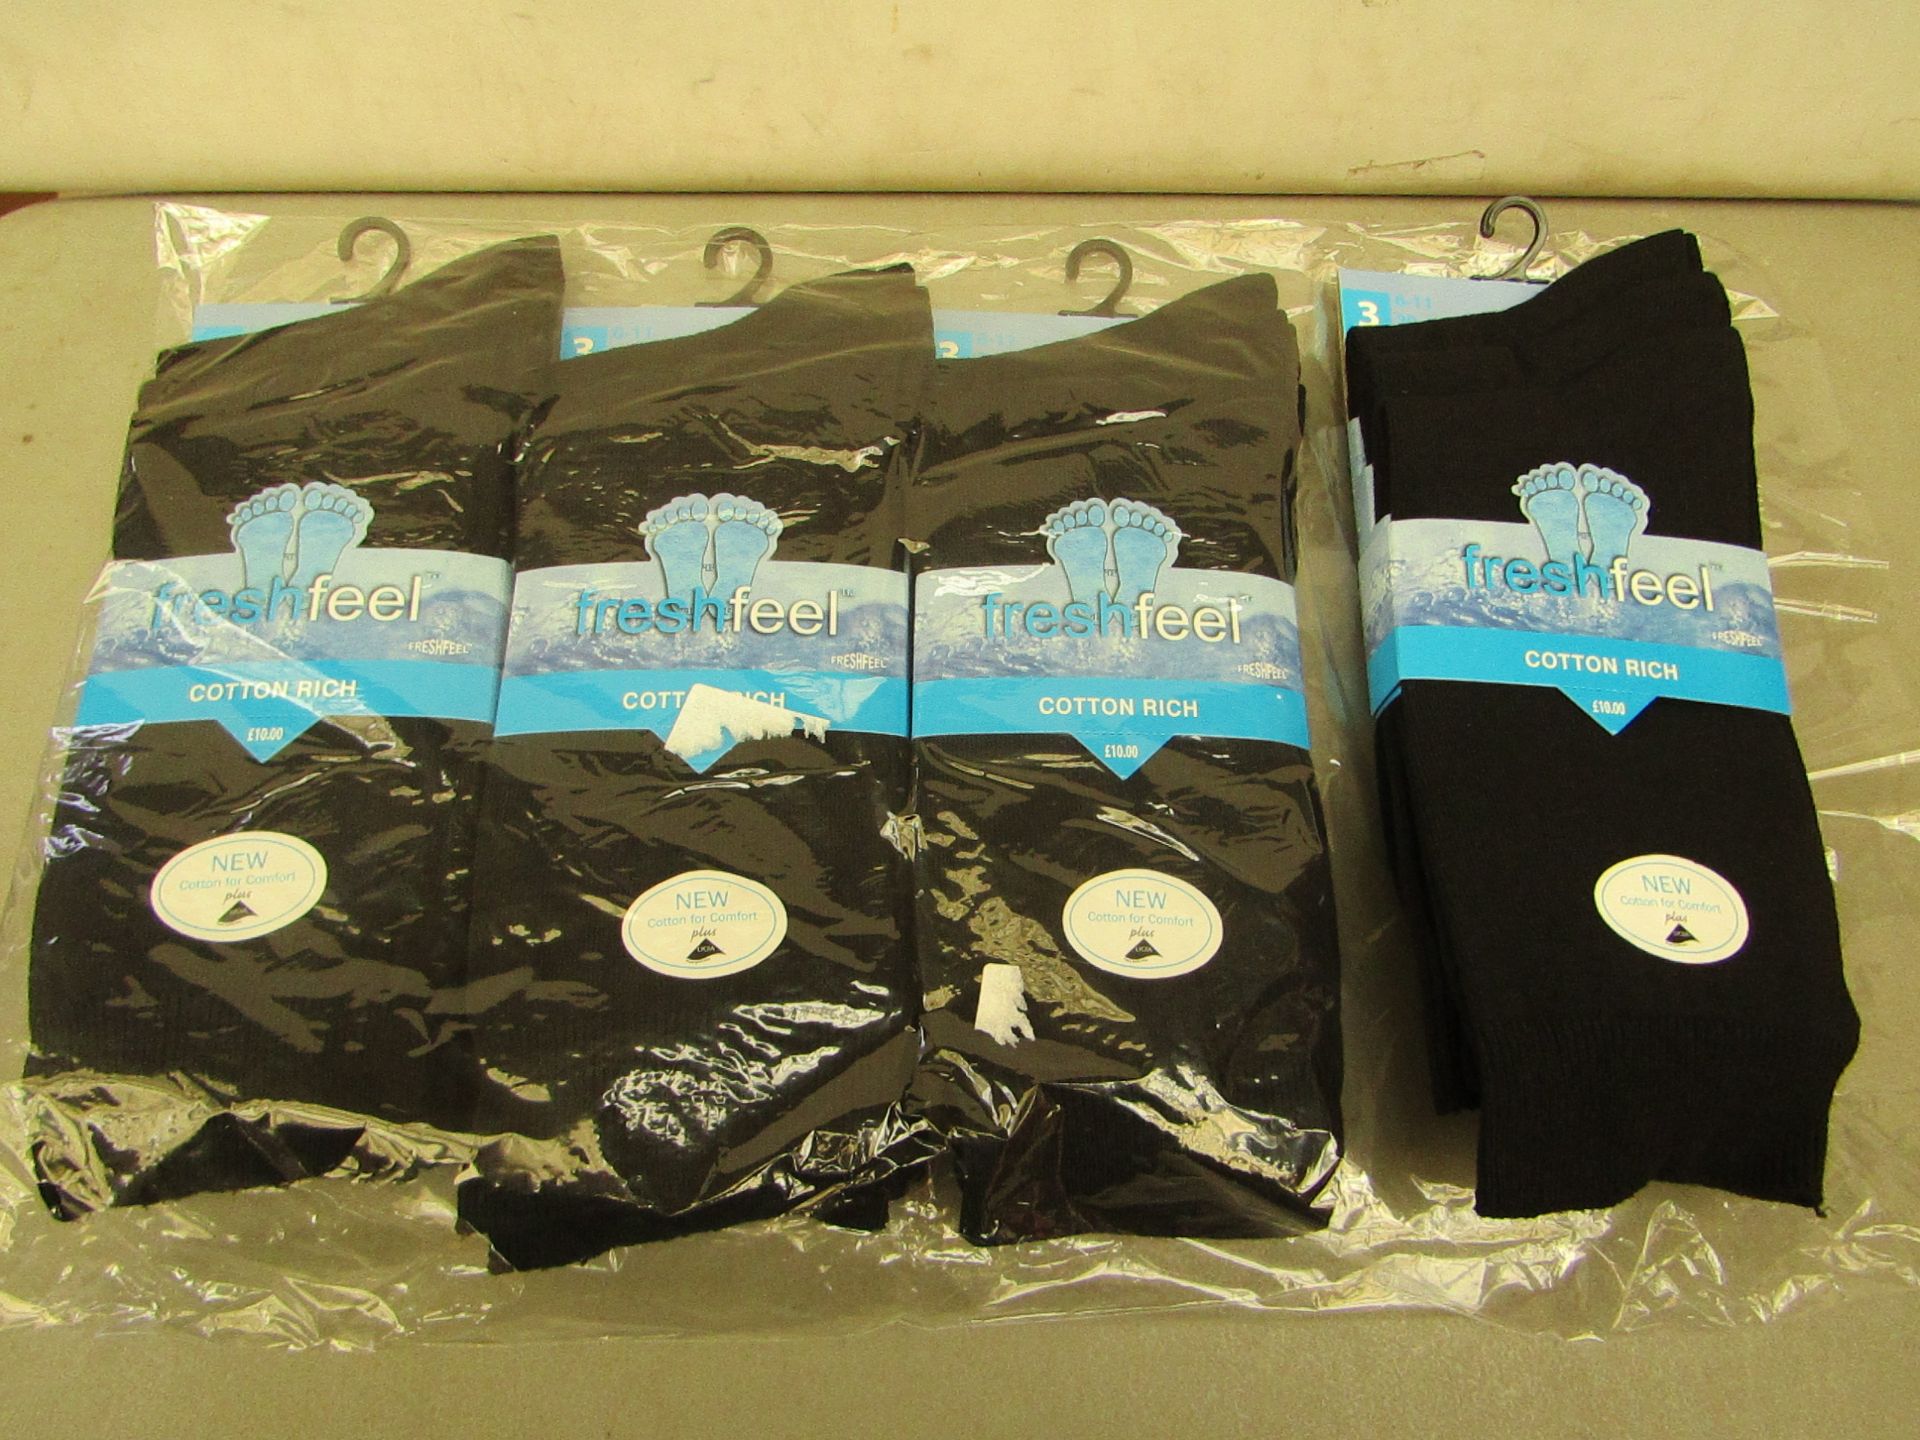 12 x pairs of Fresh Feel Black Cotton Rich with Lycra for Comfort Socks size 6-11 new & packaged